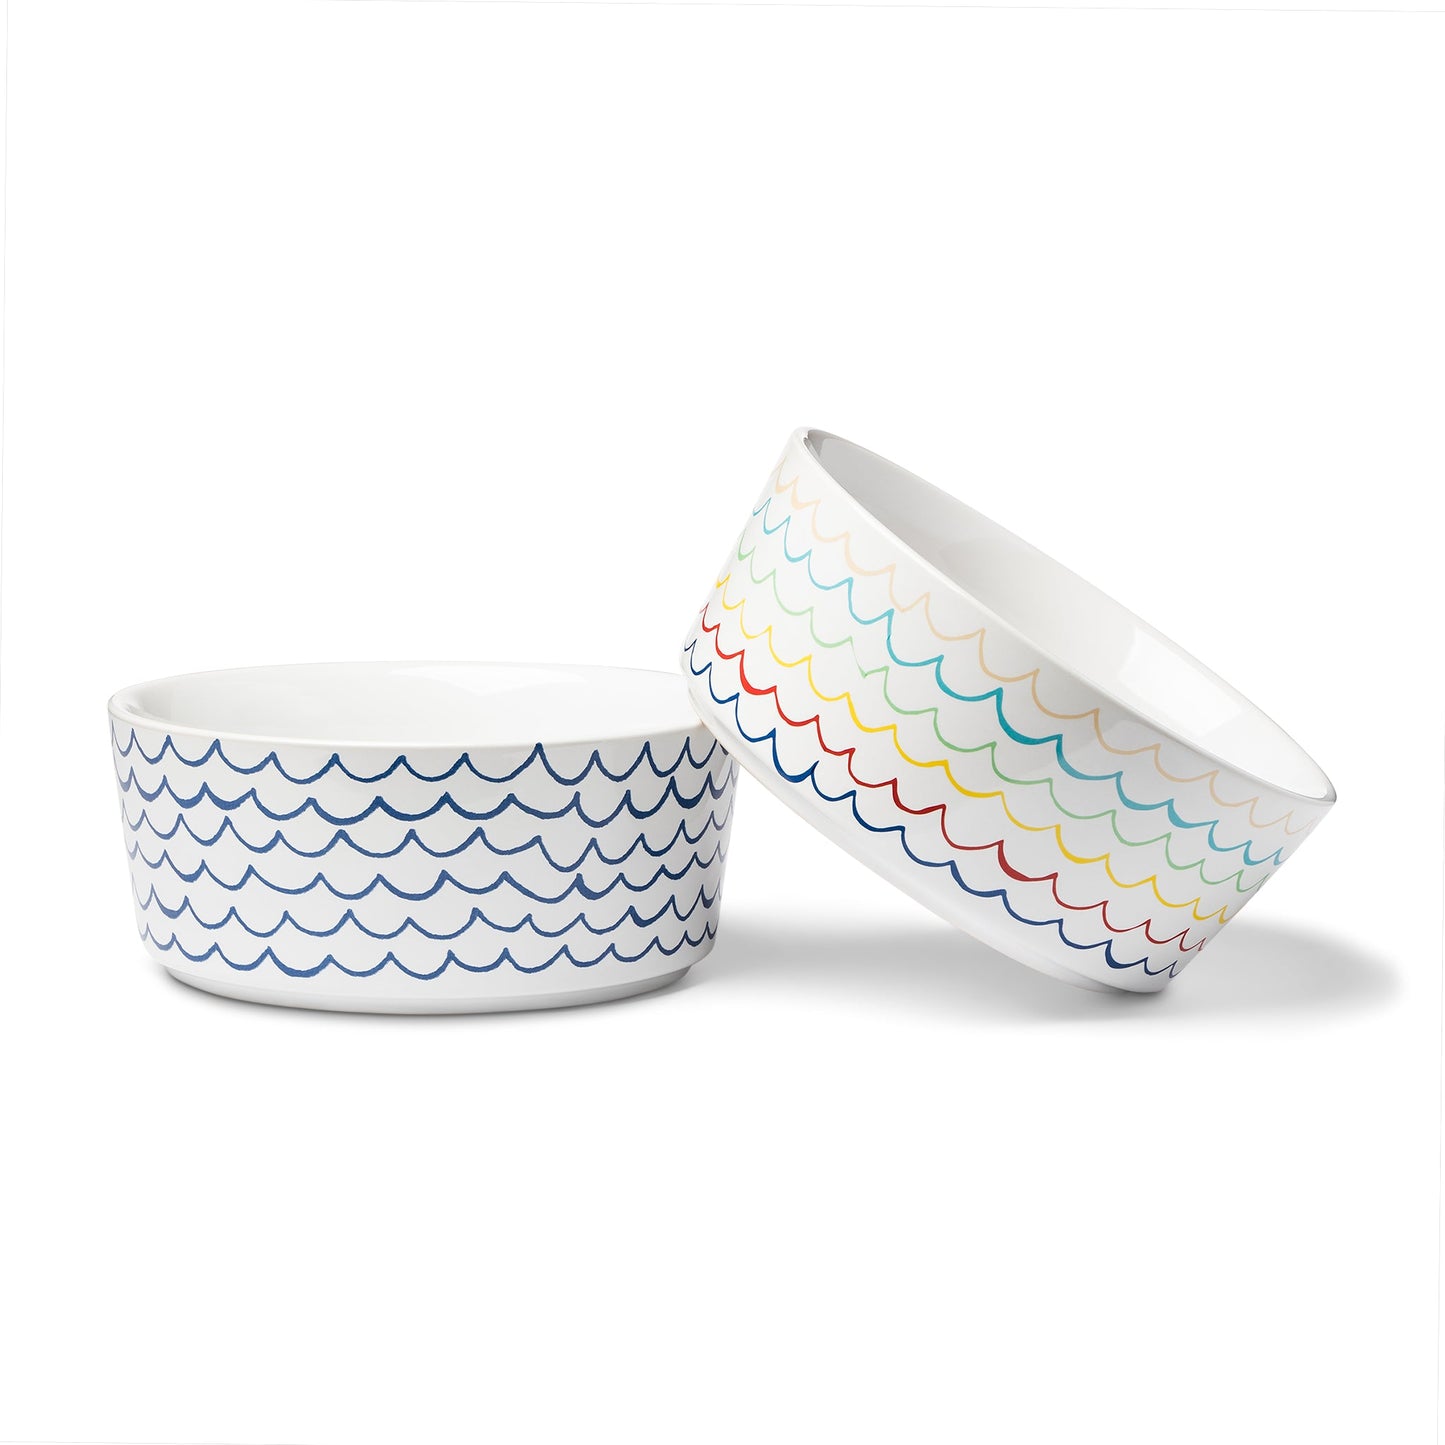 Sketched Wave Ceramic Dog Bowl by Waggo two options